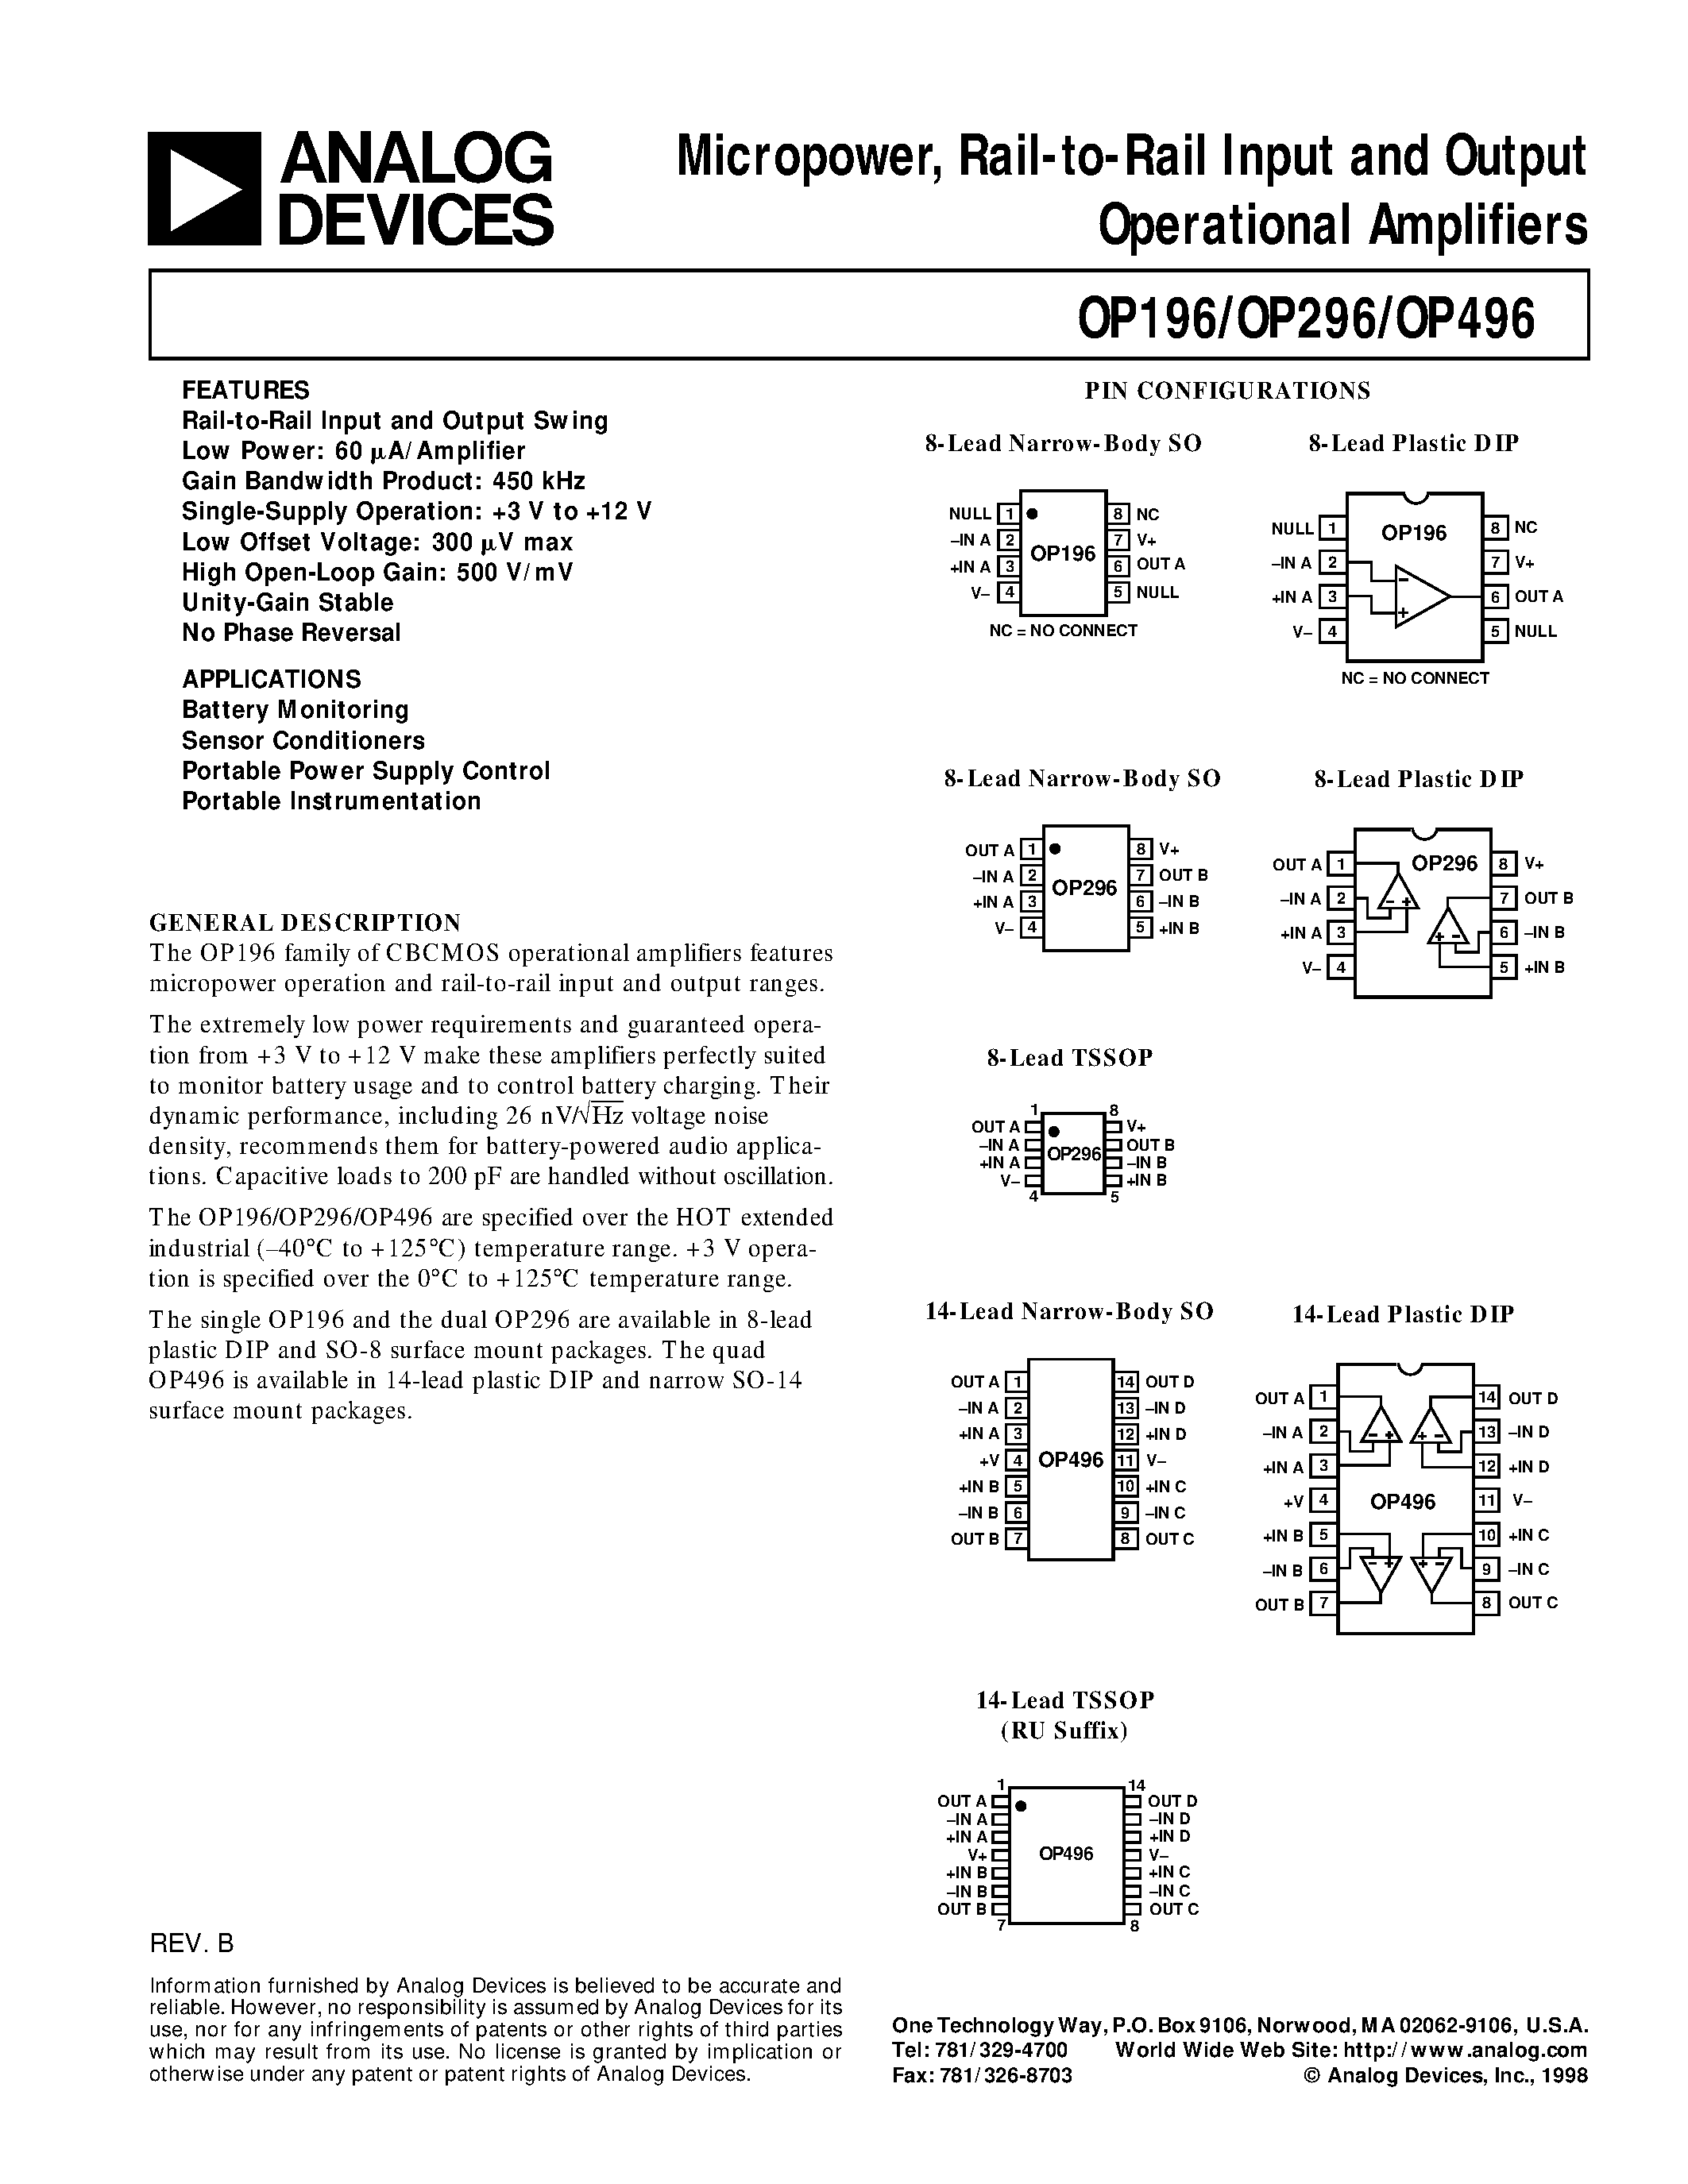 Даташит OP196 - Micropower / Rail-to-Rail Input and Output Operational Amplifiers страница 1